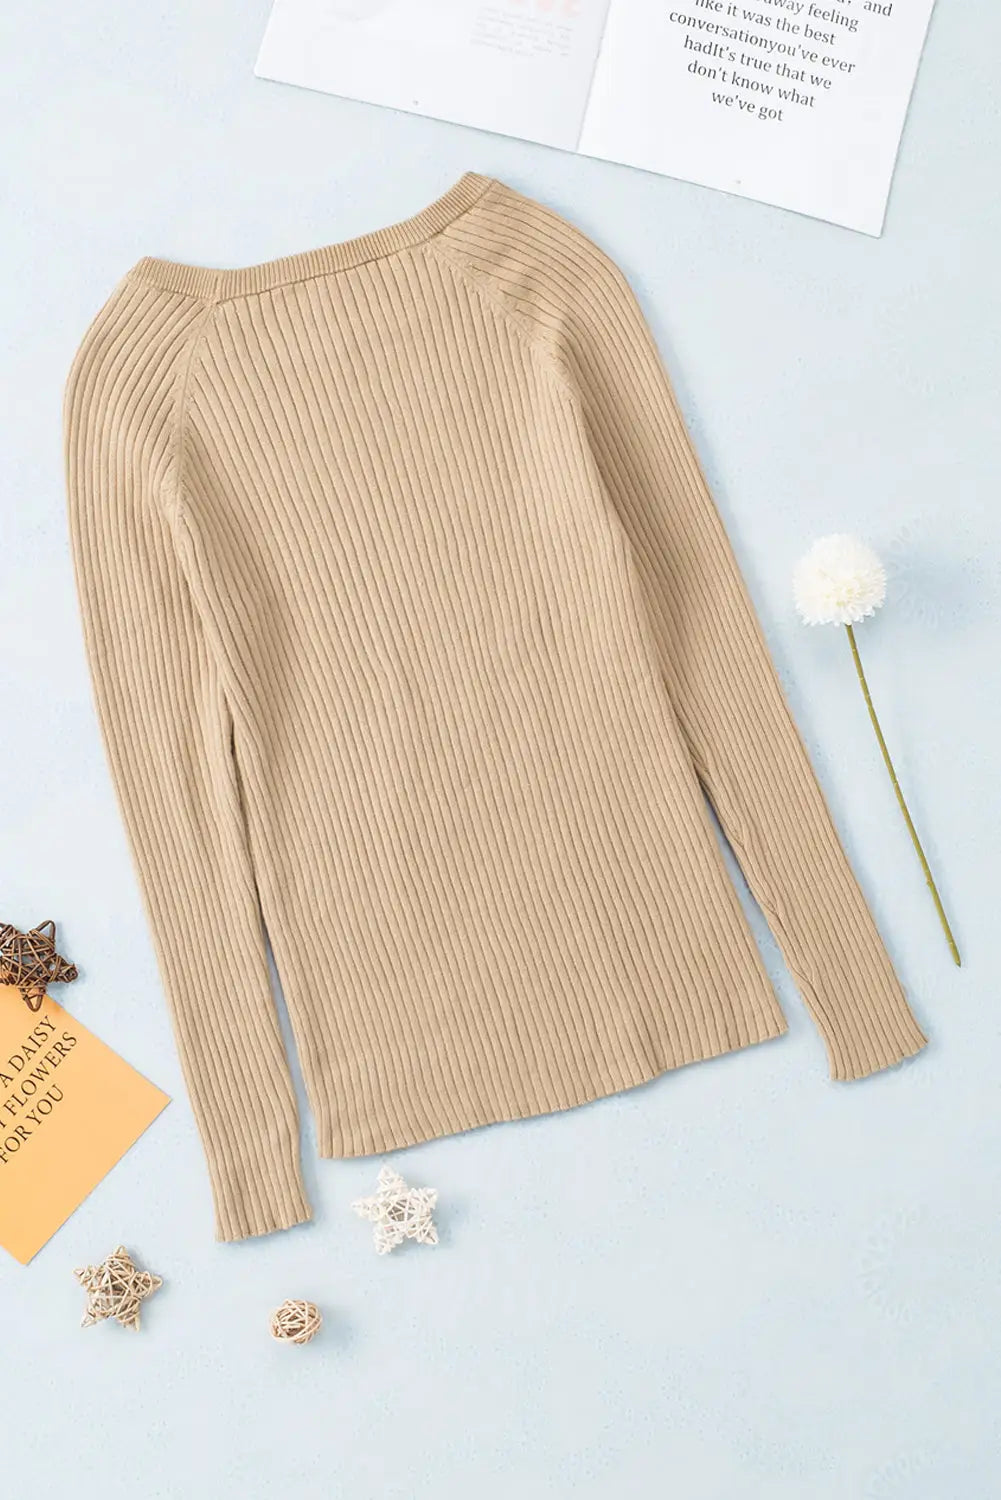 Apricot ribbed knit round neck sweater - tops